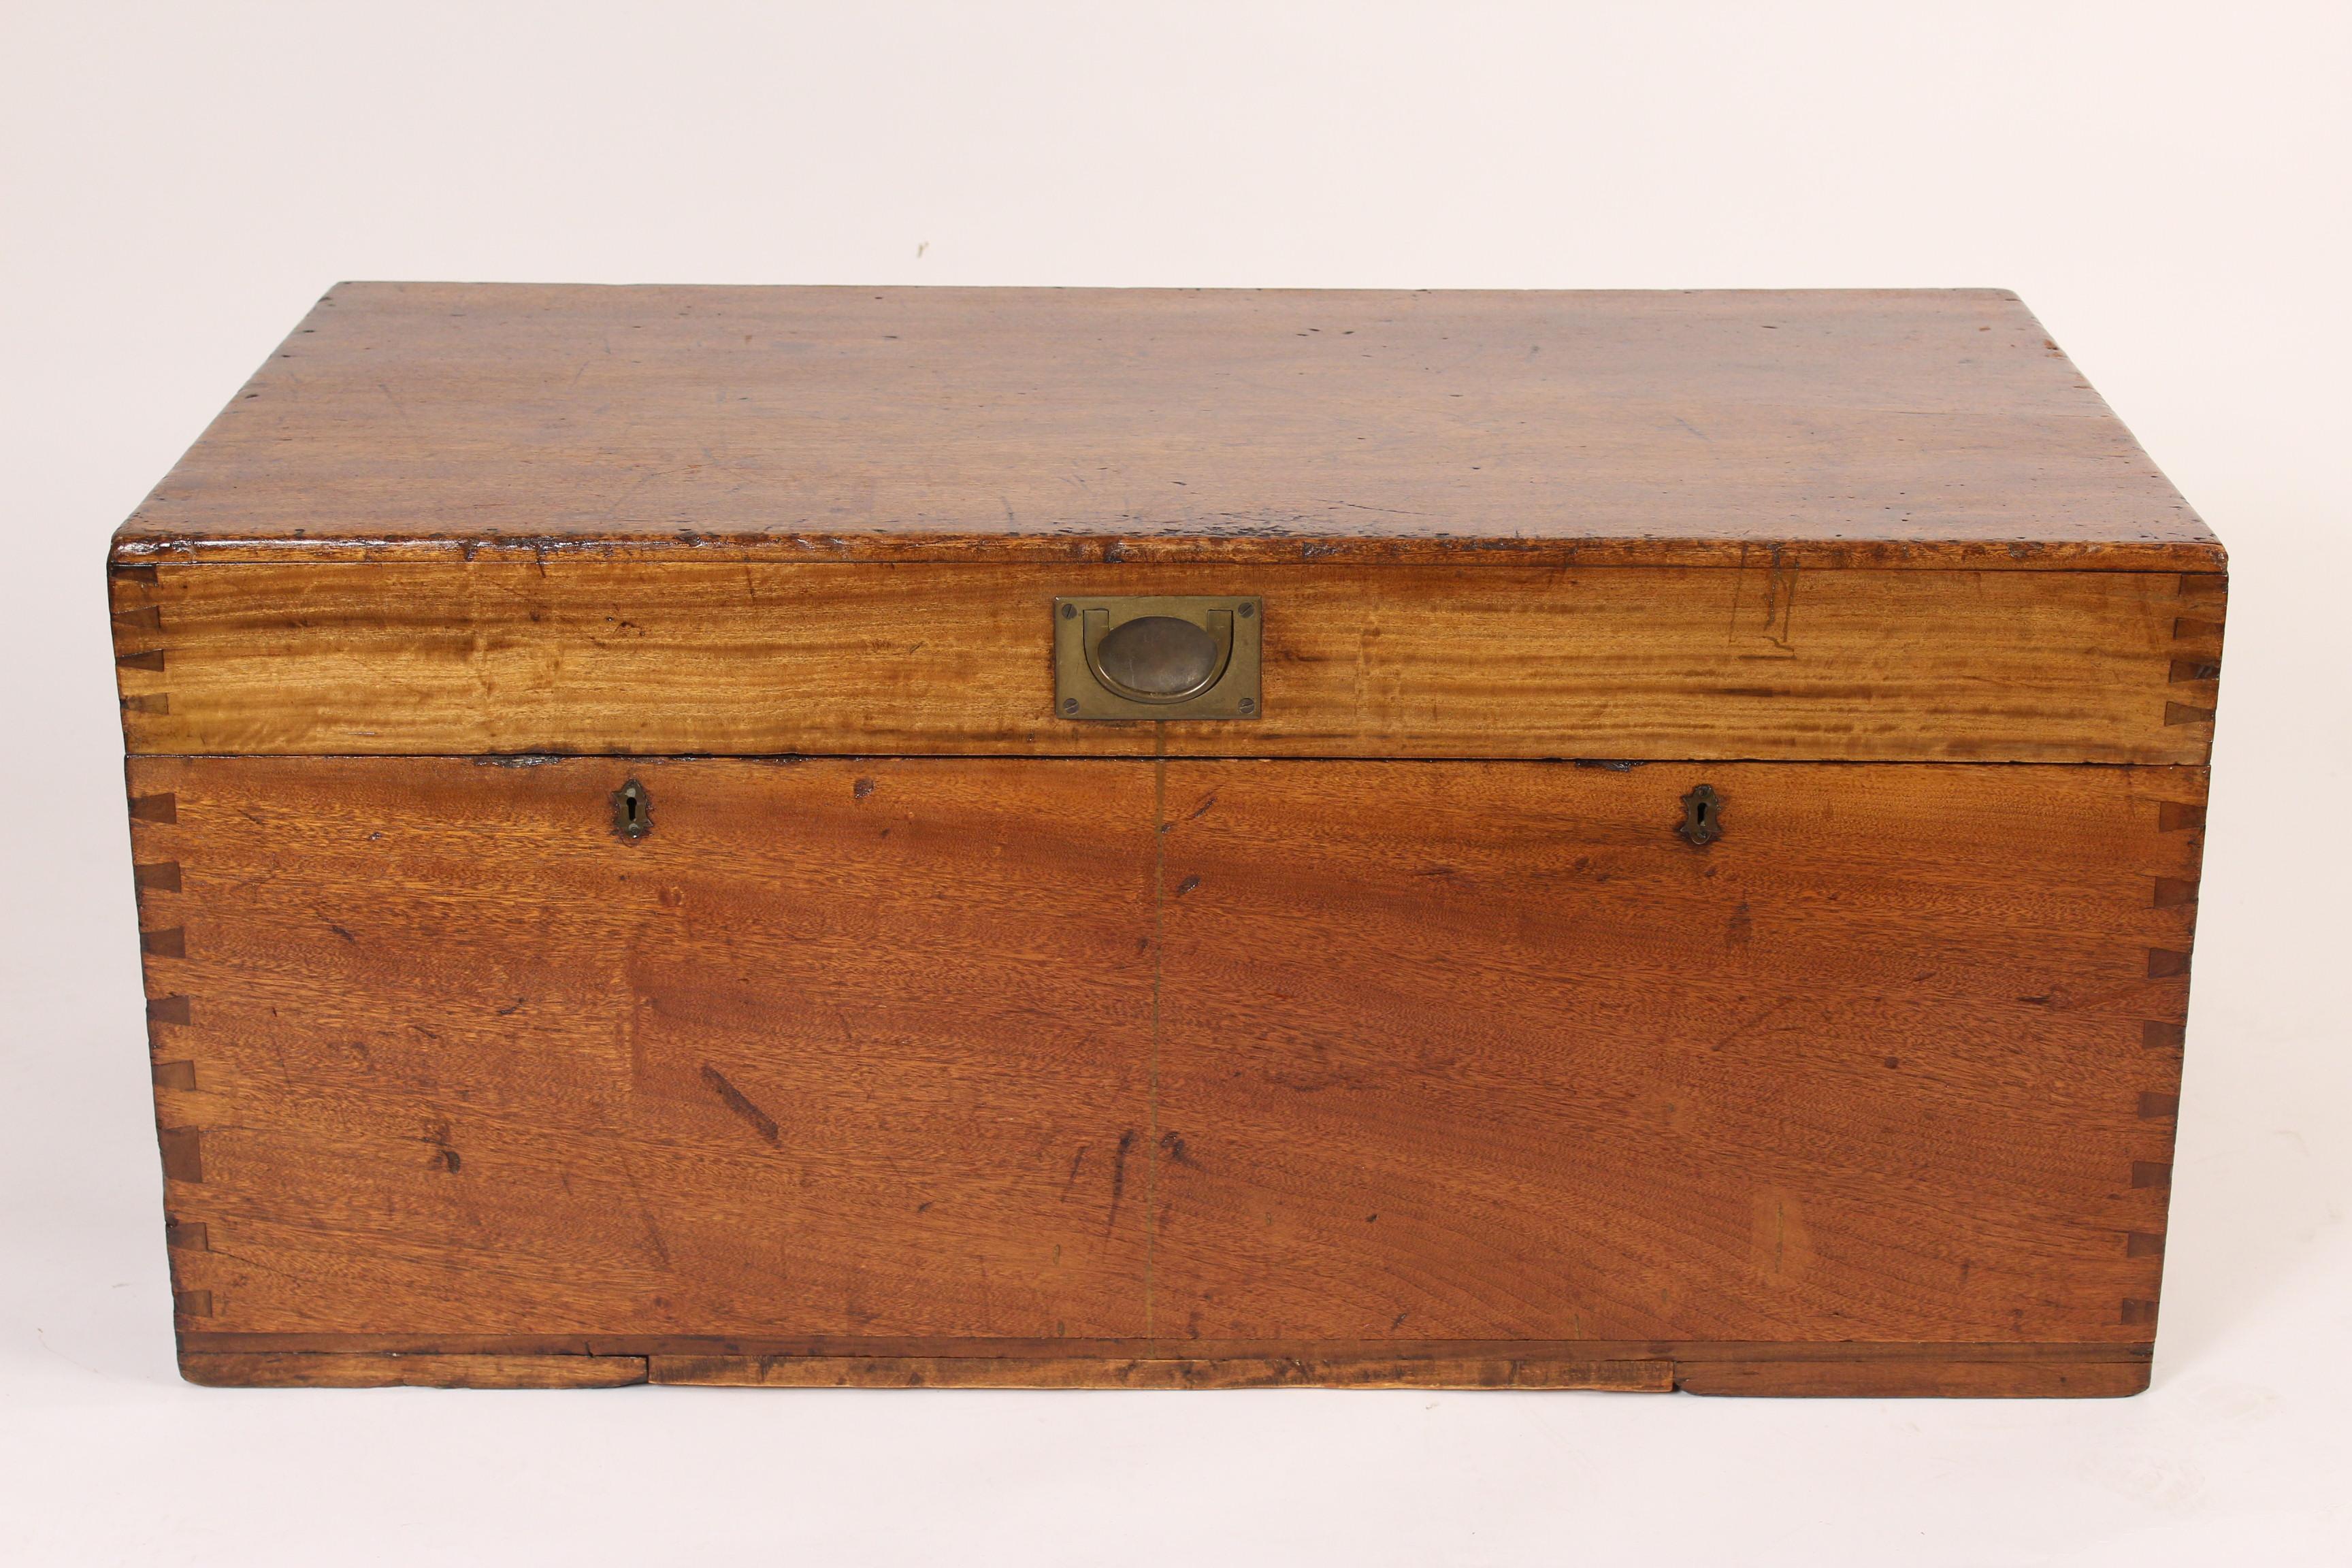 Antique camphor wood campaign trunk, circa 1900. With brass hardware and dove tailed construction.